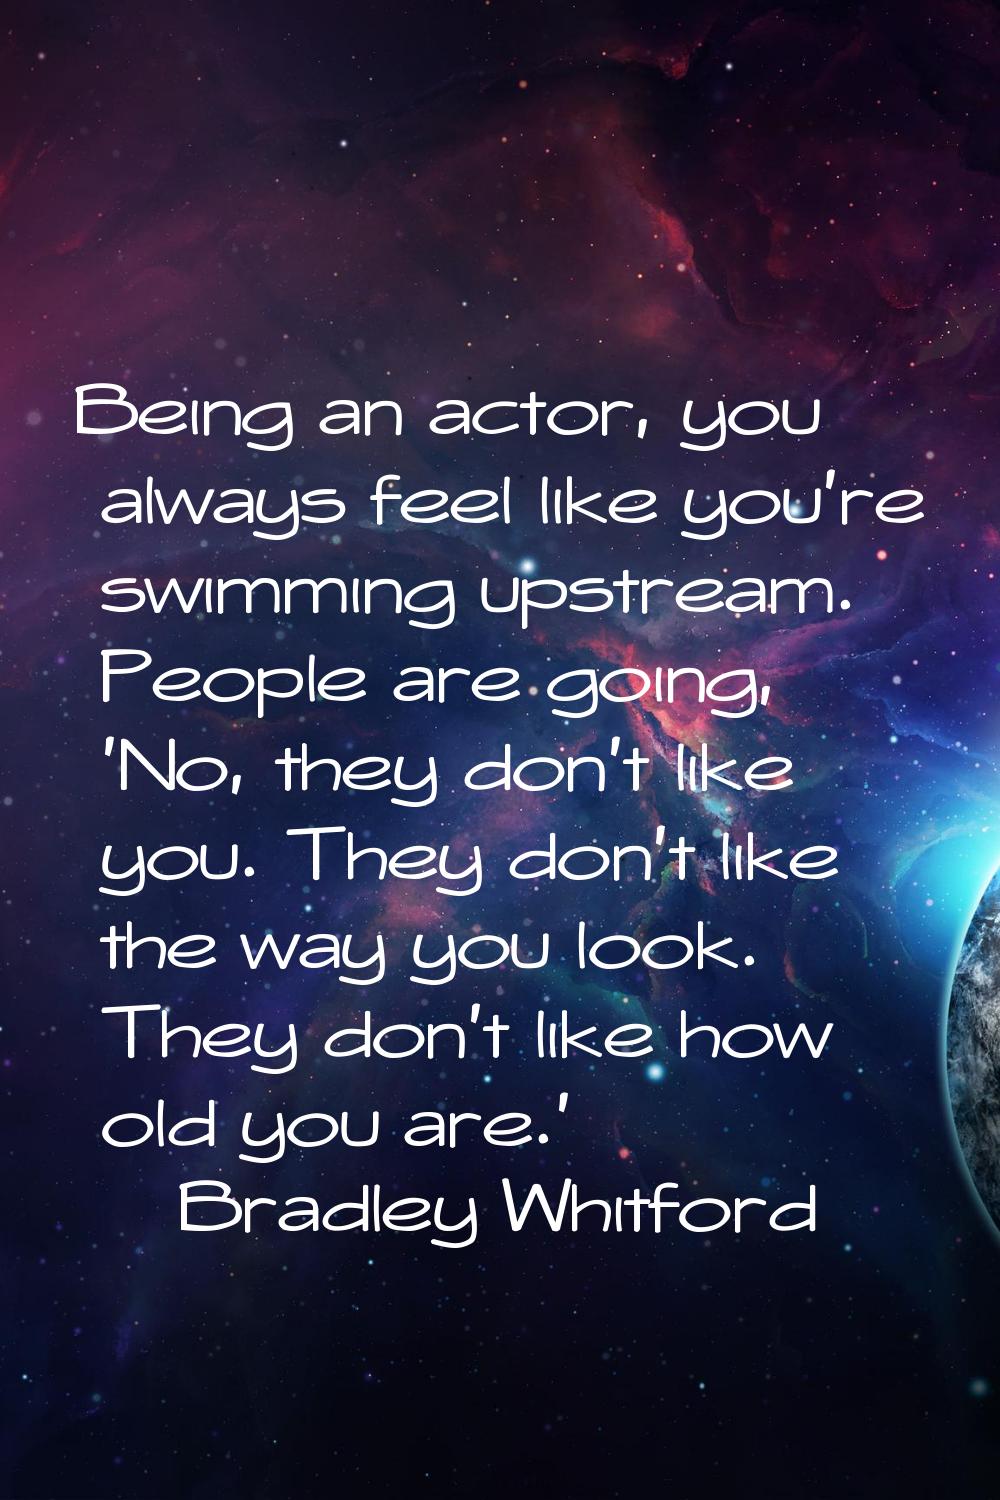 Being an actor, you always feel like you're swimming upstream. People are going, 'No, they don't li